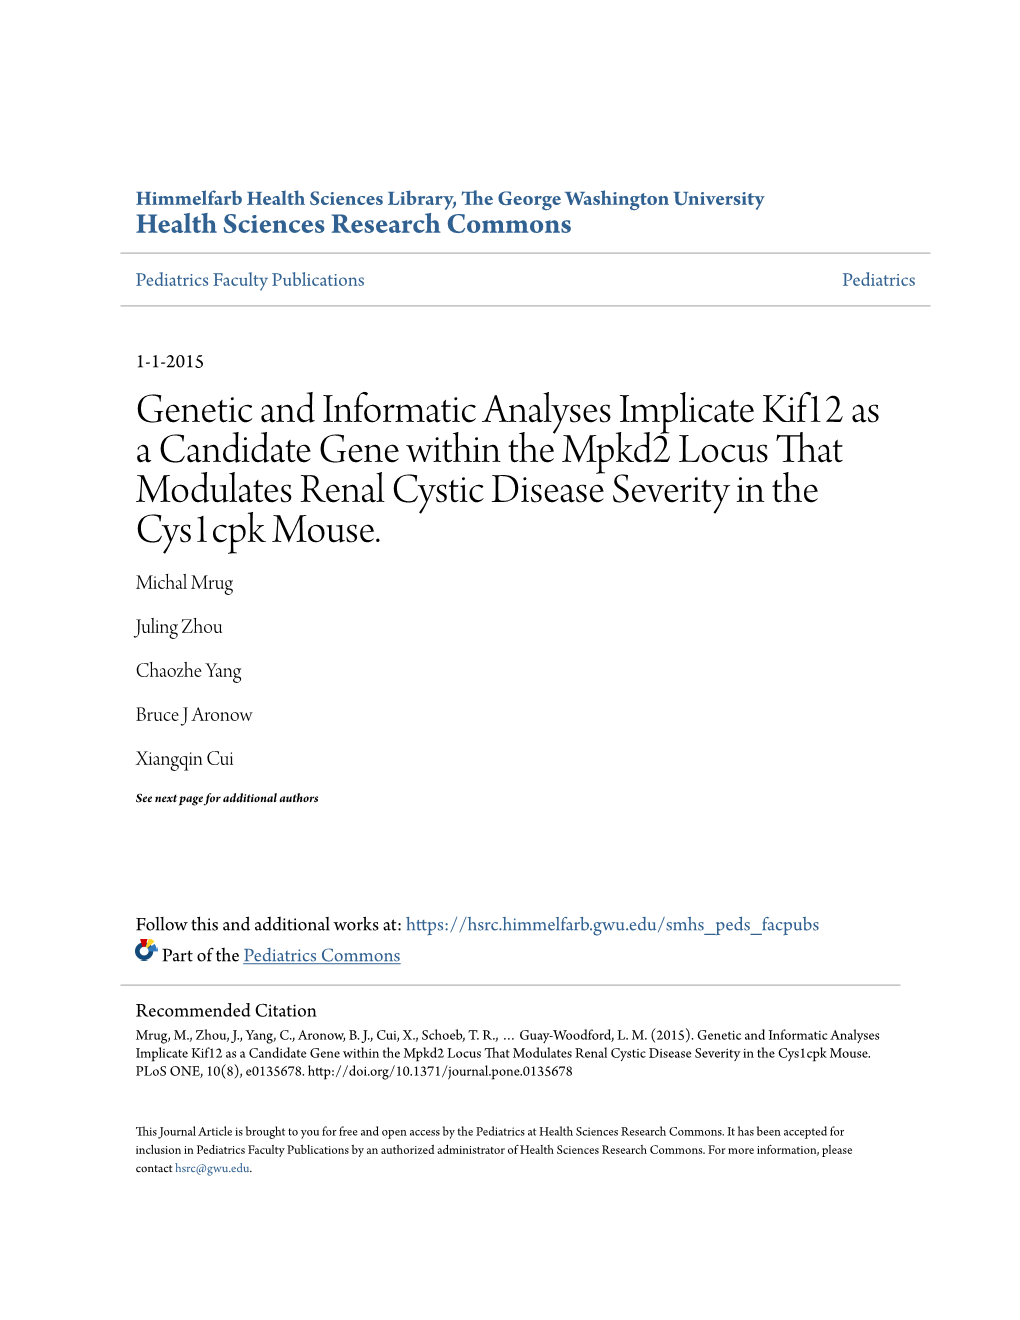 Genetic and Informatic Analyses Implicate Kif12 As a Candidate Gene Within the Mpkd2 Locus That Modulates Renal Cystic Disease Severity in the Cys1cpk Mouse